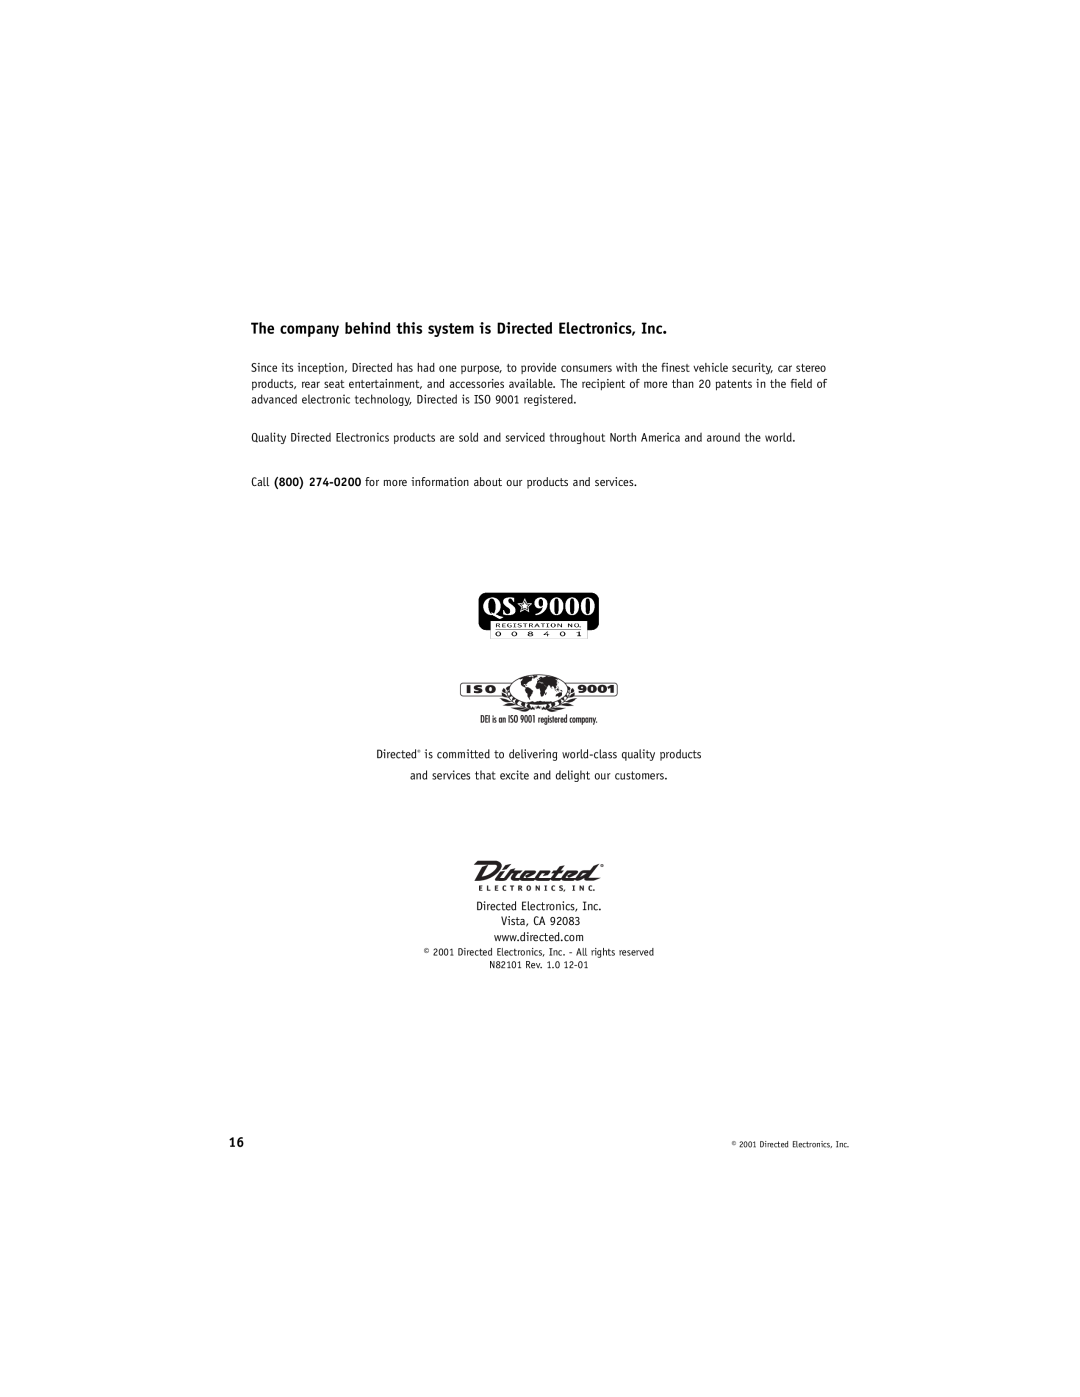 Directed Electronics VC2010 manual The company behind this system is Directed Electronics, Inc 